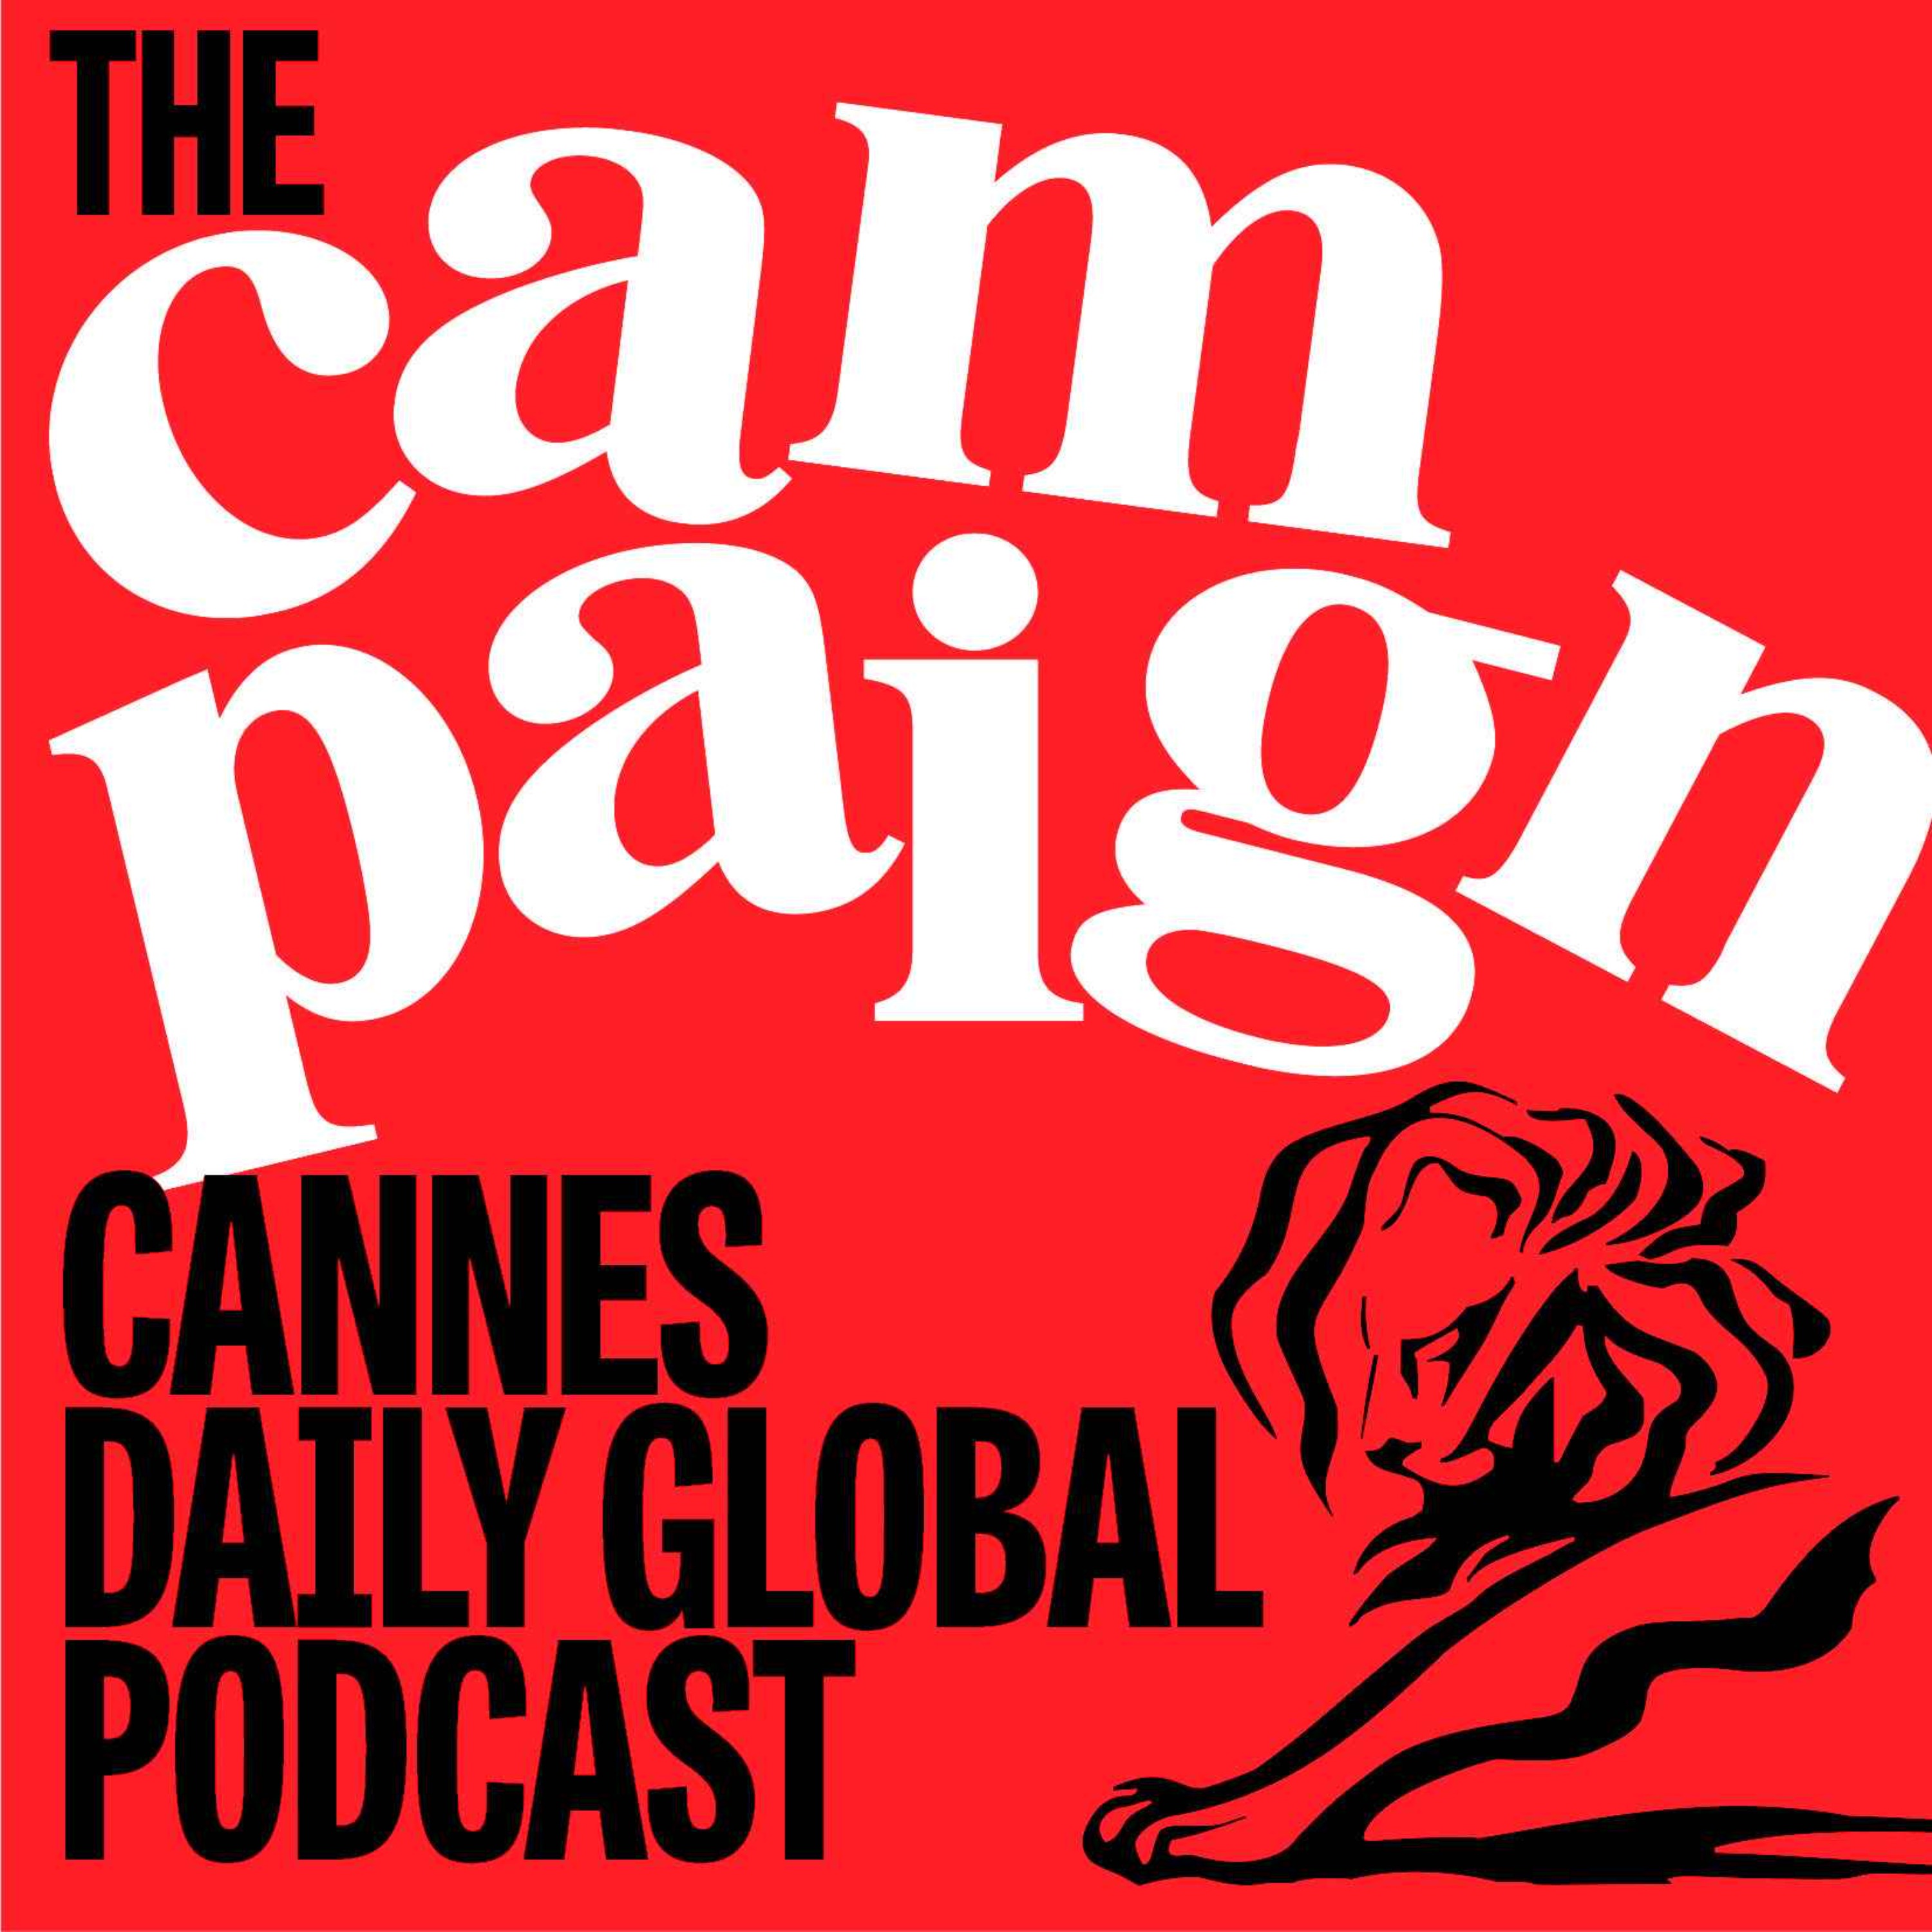 Cannes Daily Global Podcast ep. 3: Nike & Clash of Clans win, plus humour is back